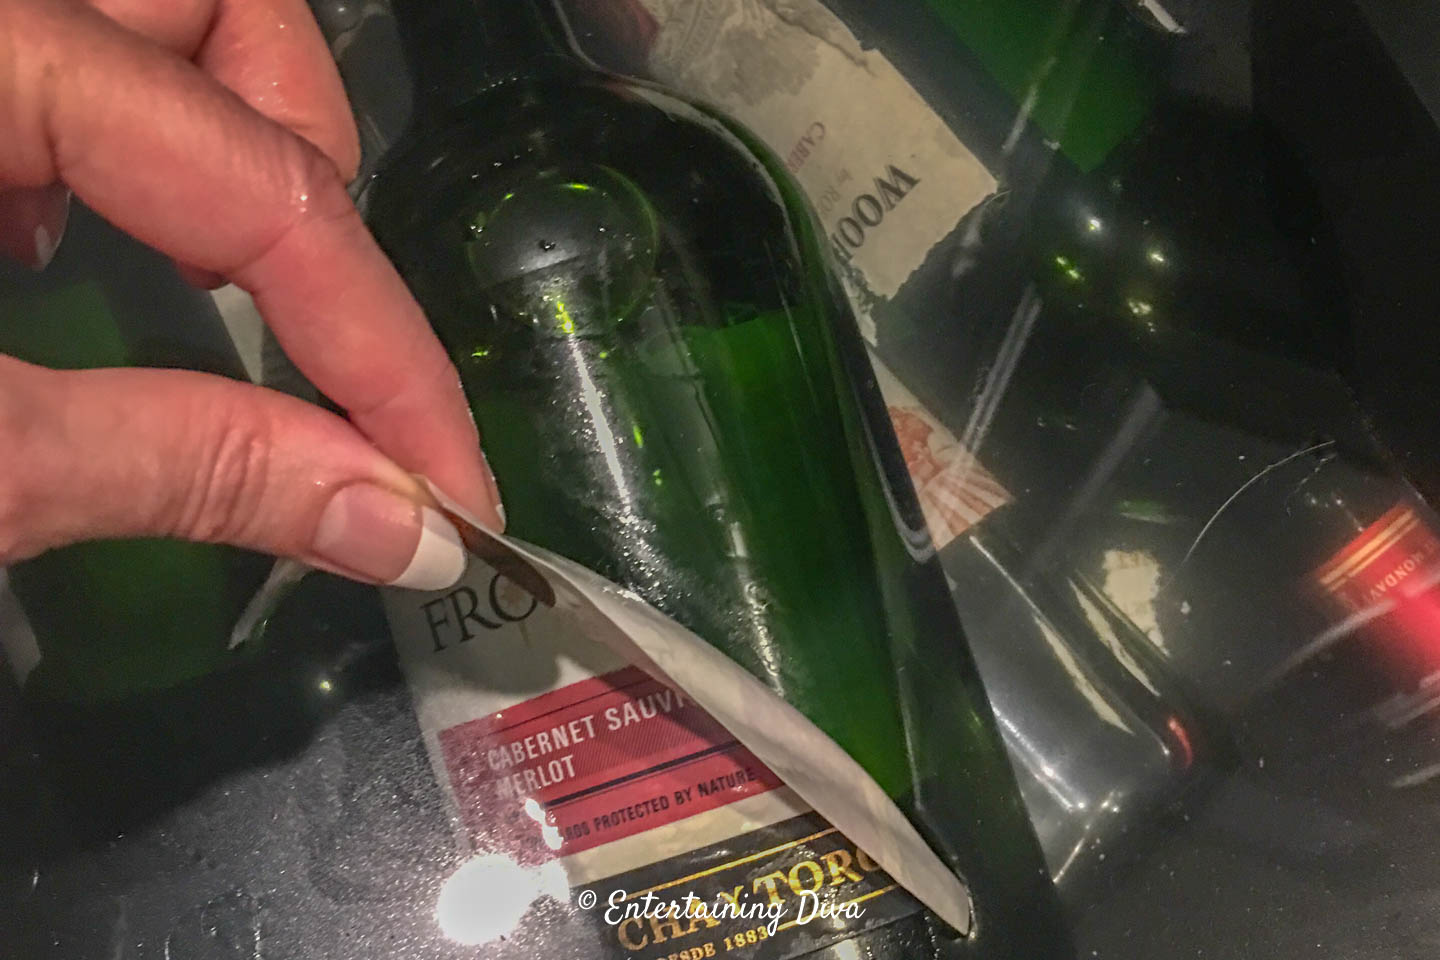 Pulling the labels off the bottles